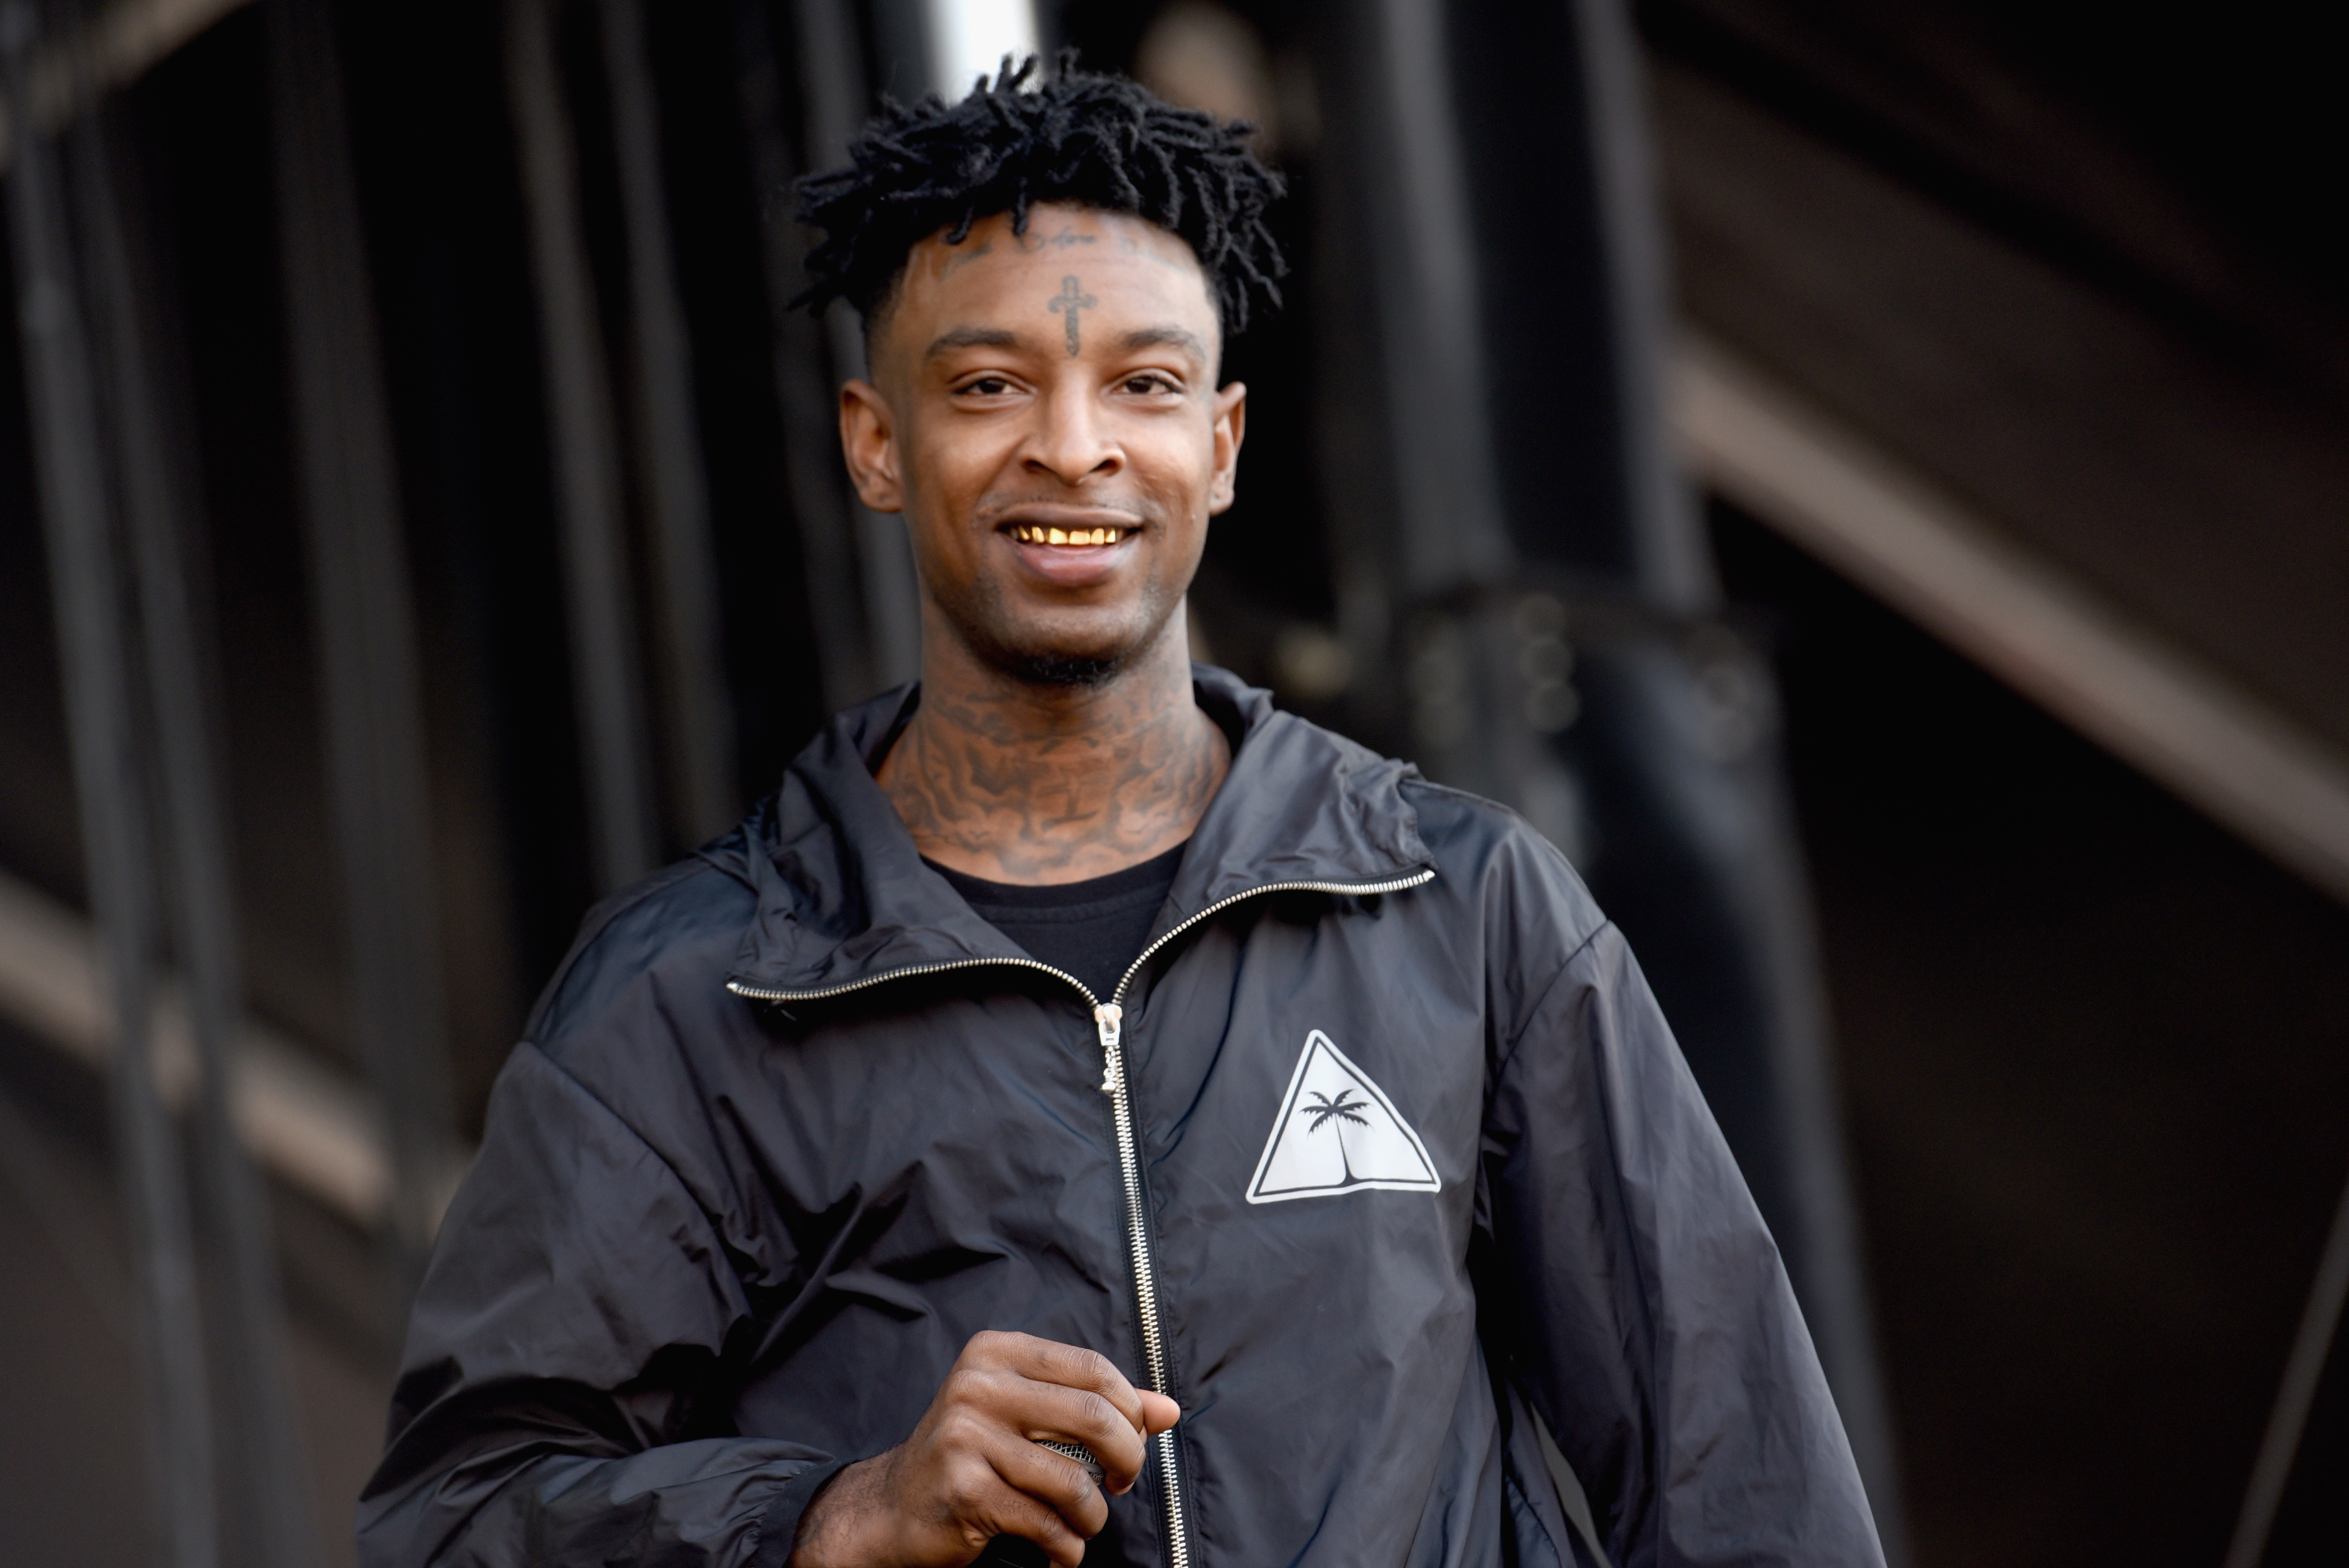 21 Savage Dropped $40K On His Kids At Gucci Store